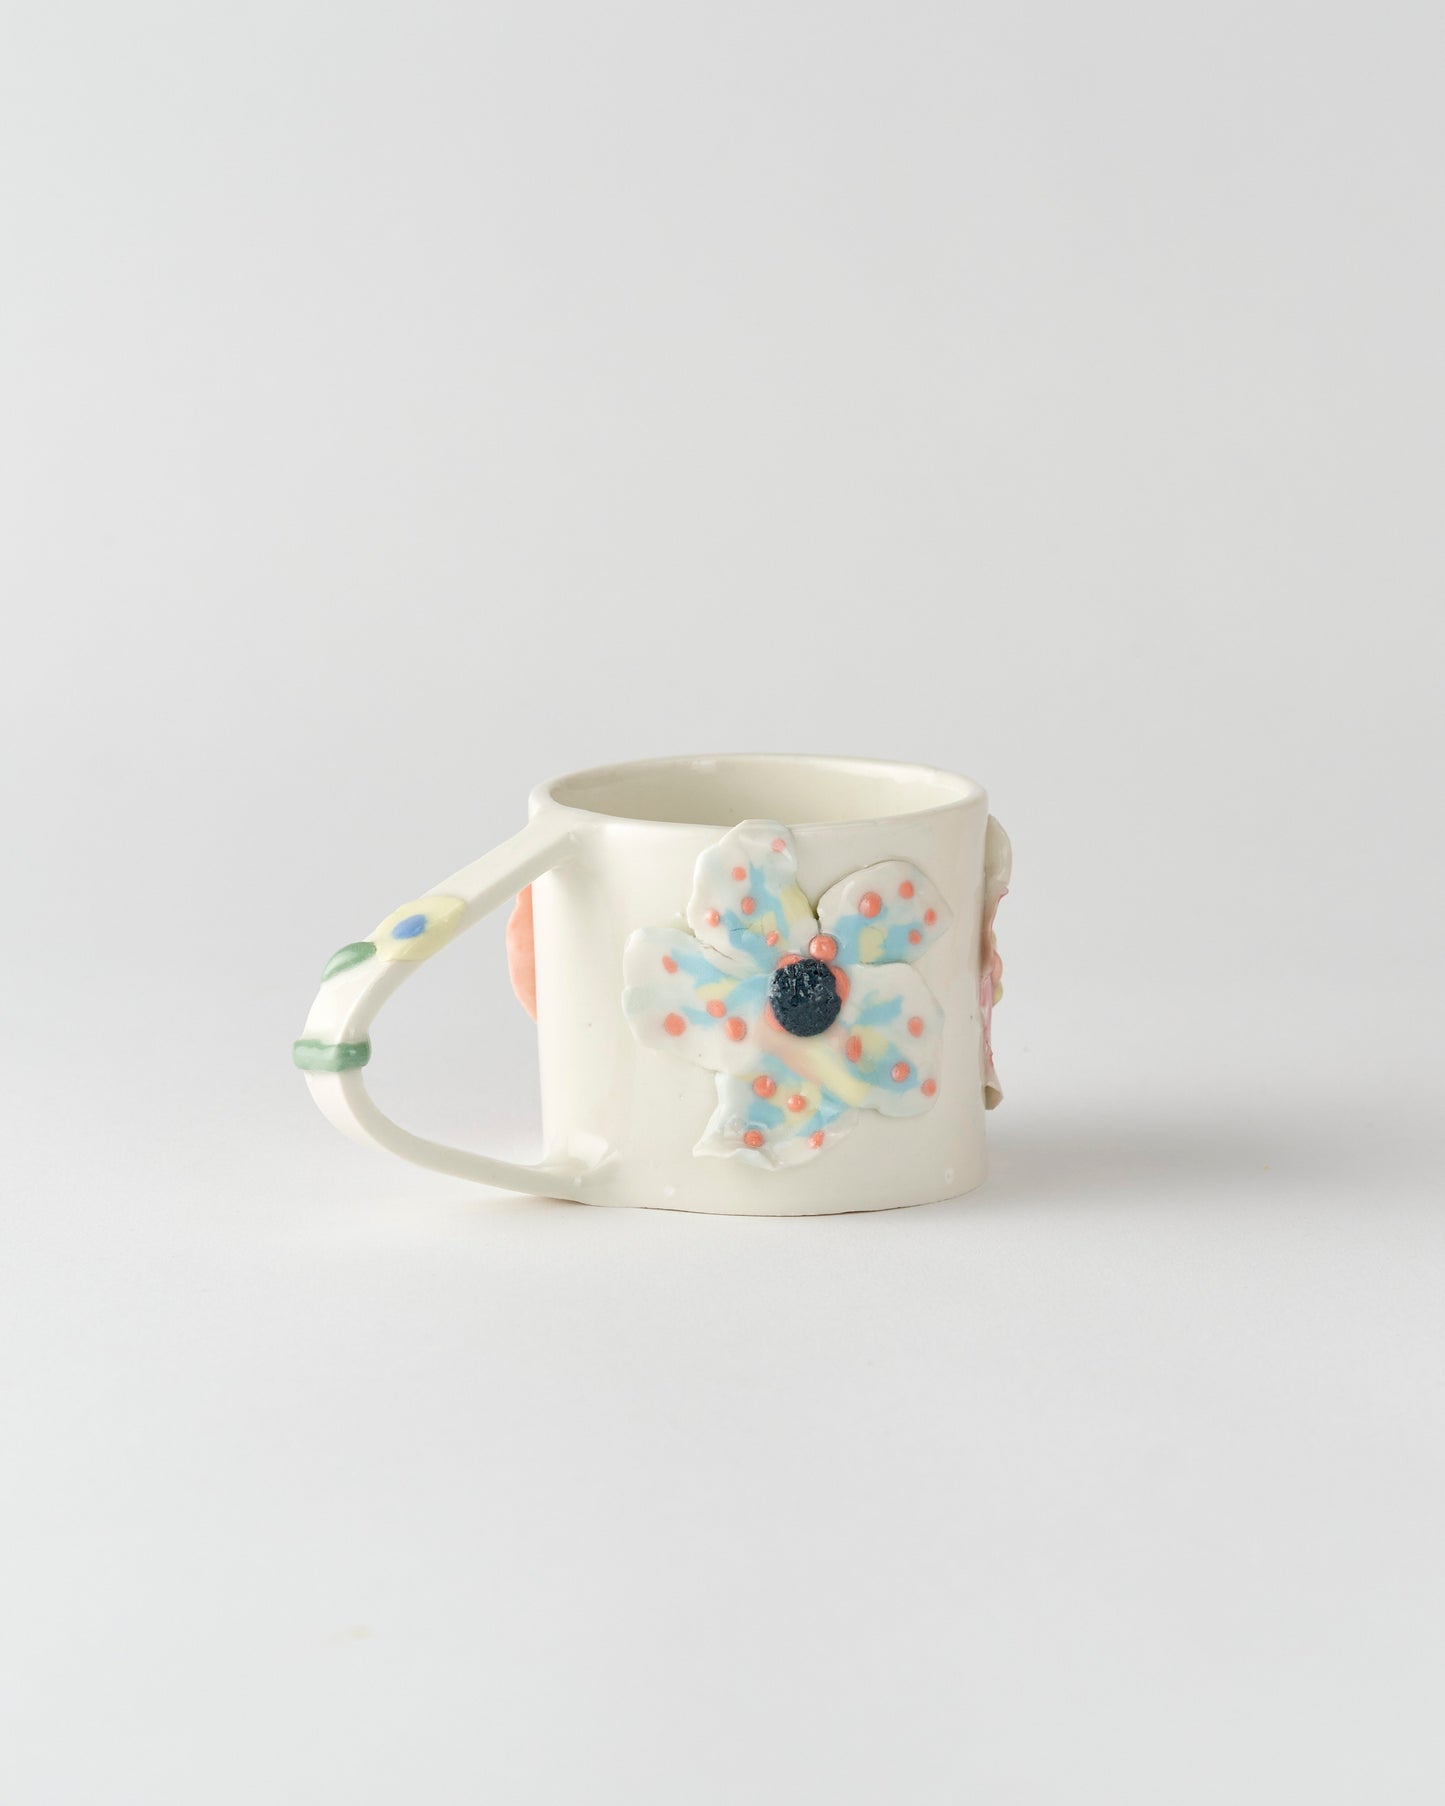 Marie Priour / Forget me not / Mug #1